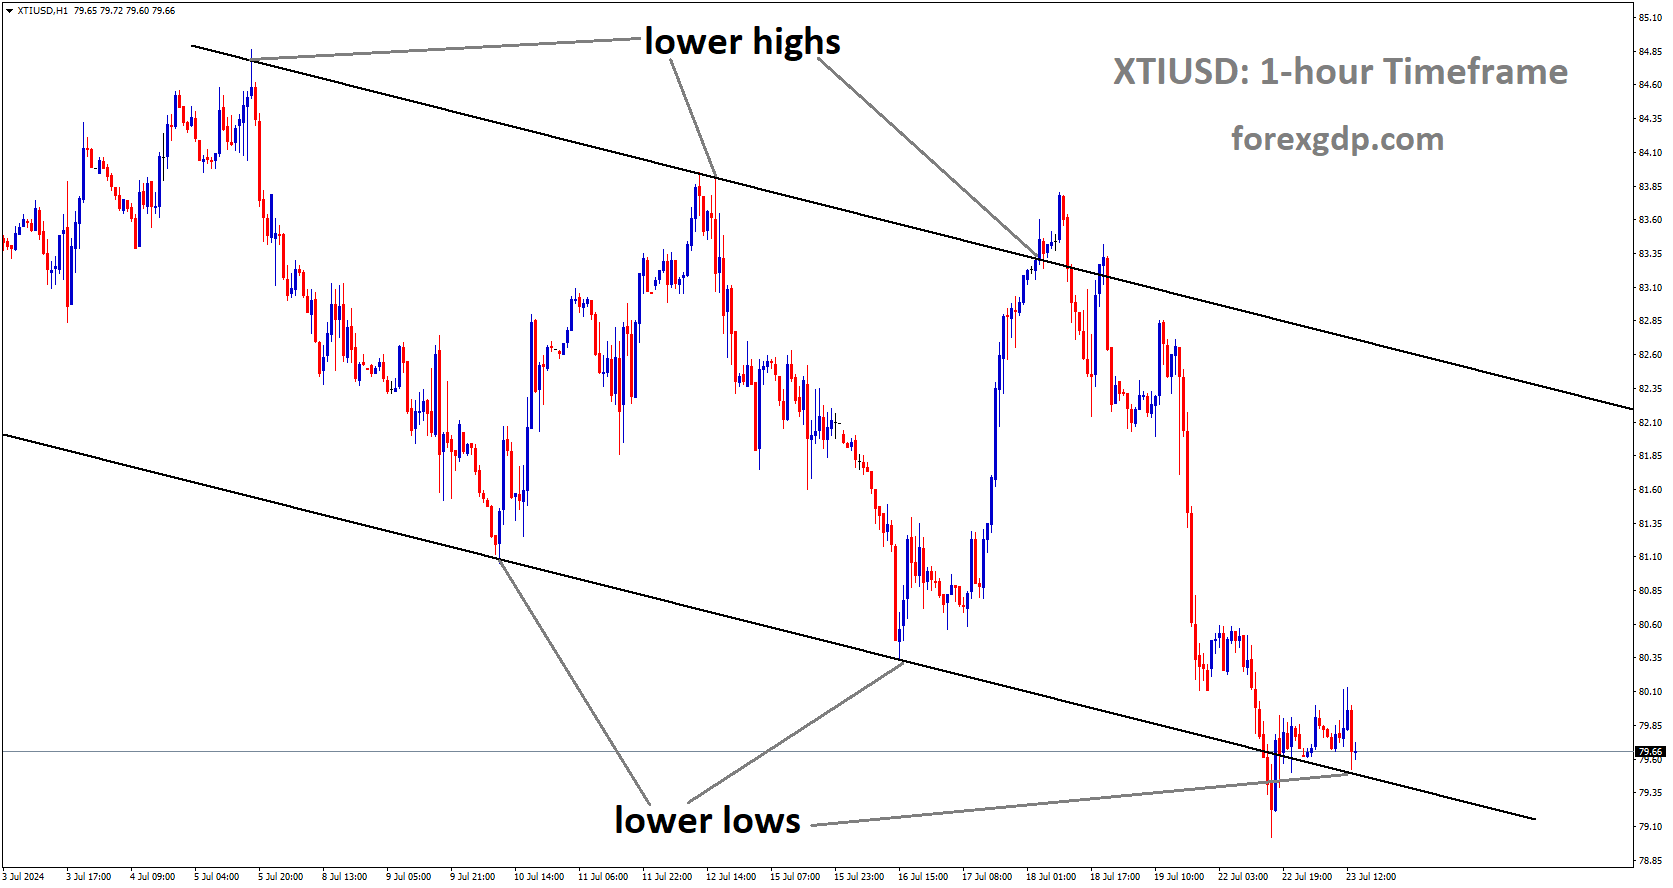 XTIUSD is moving in Descending channel and market has reached lower low area of the channel